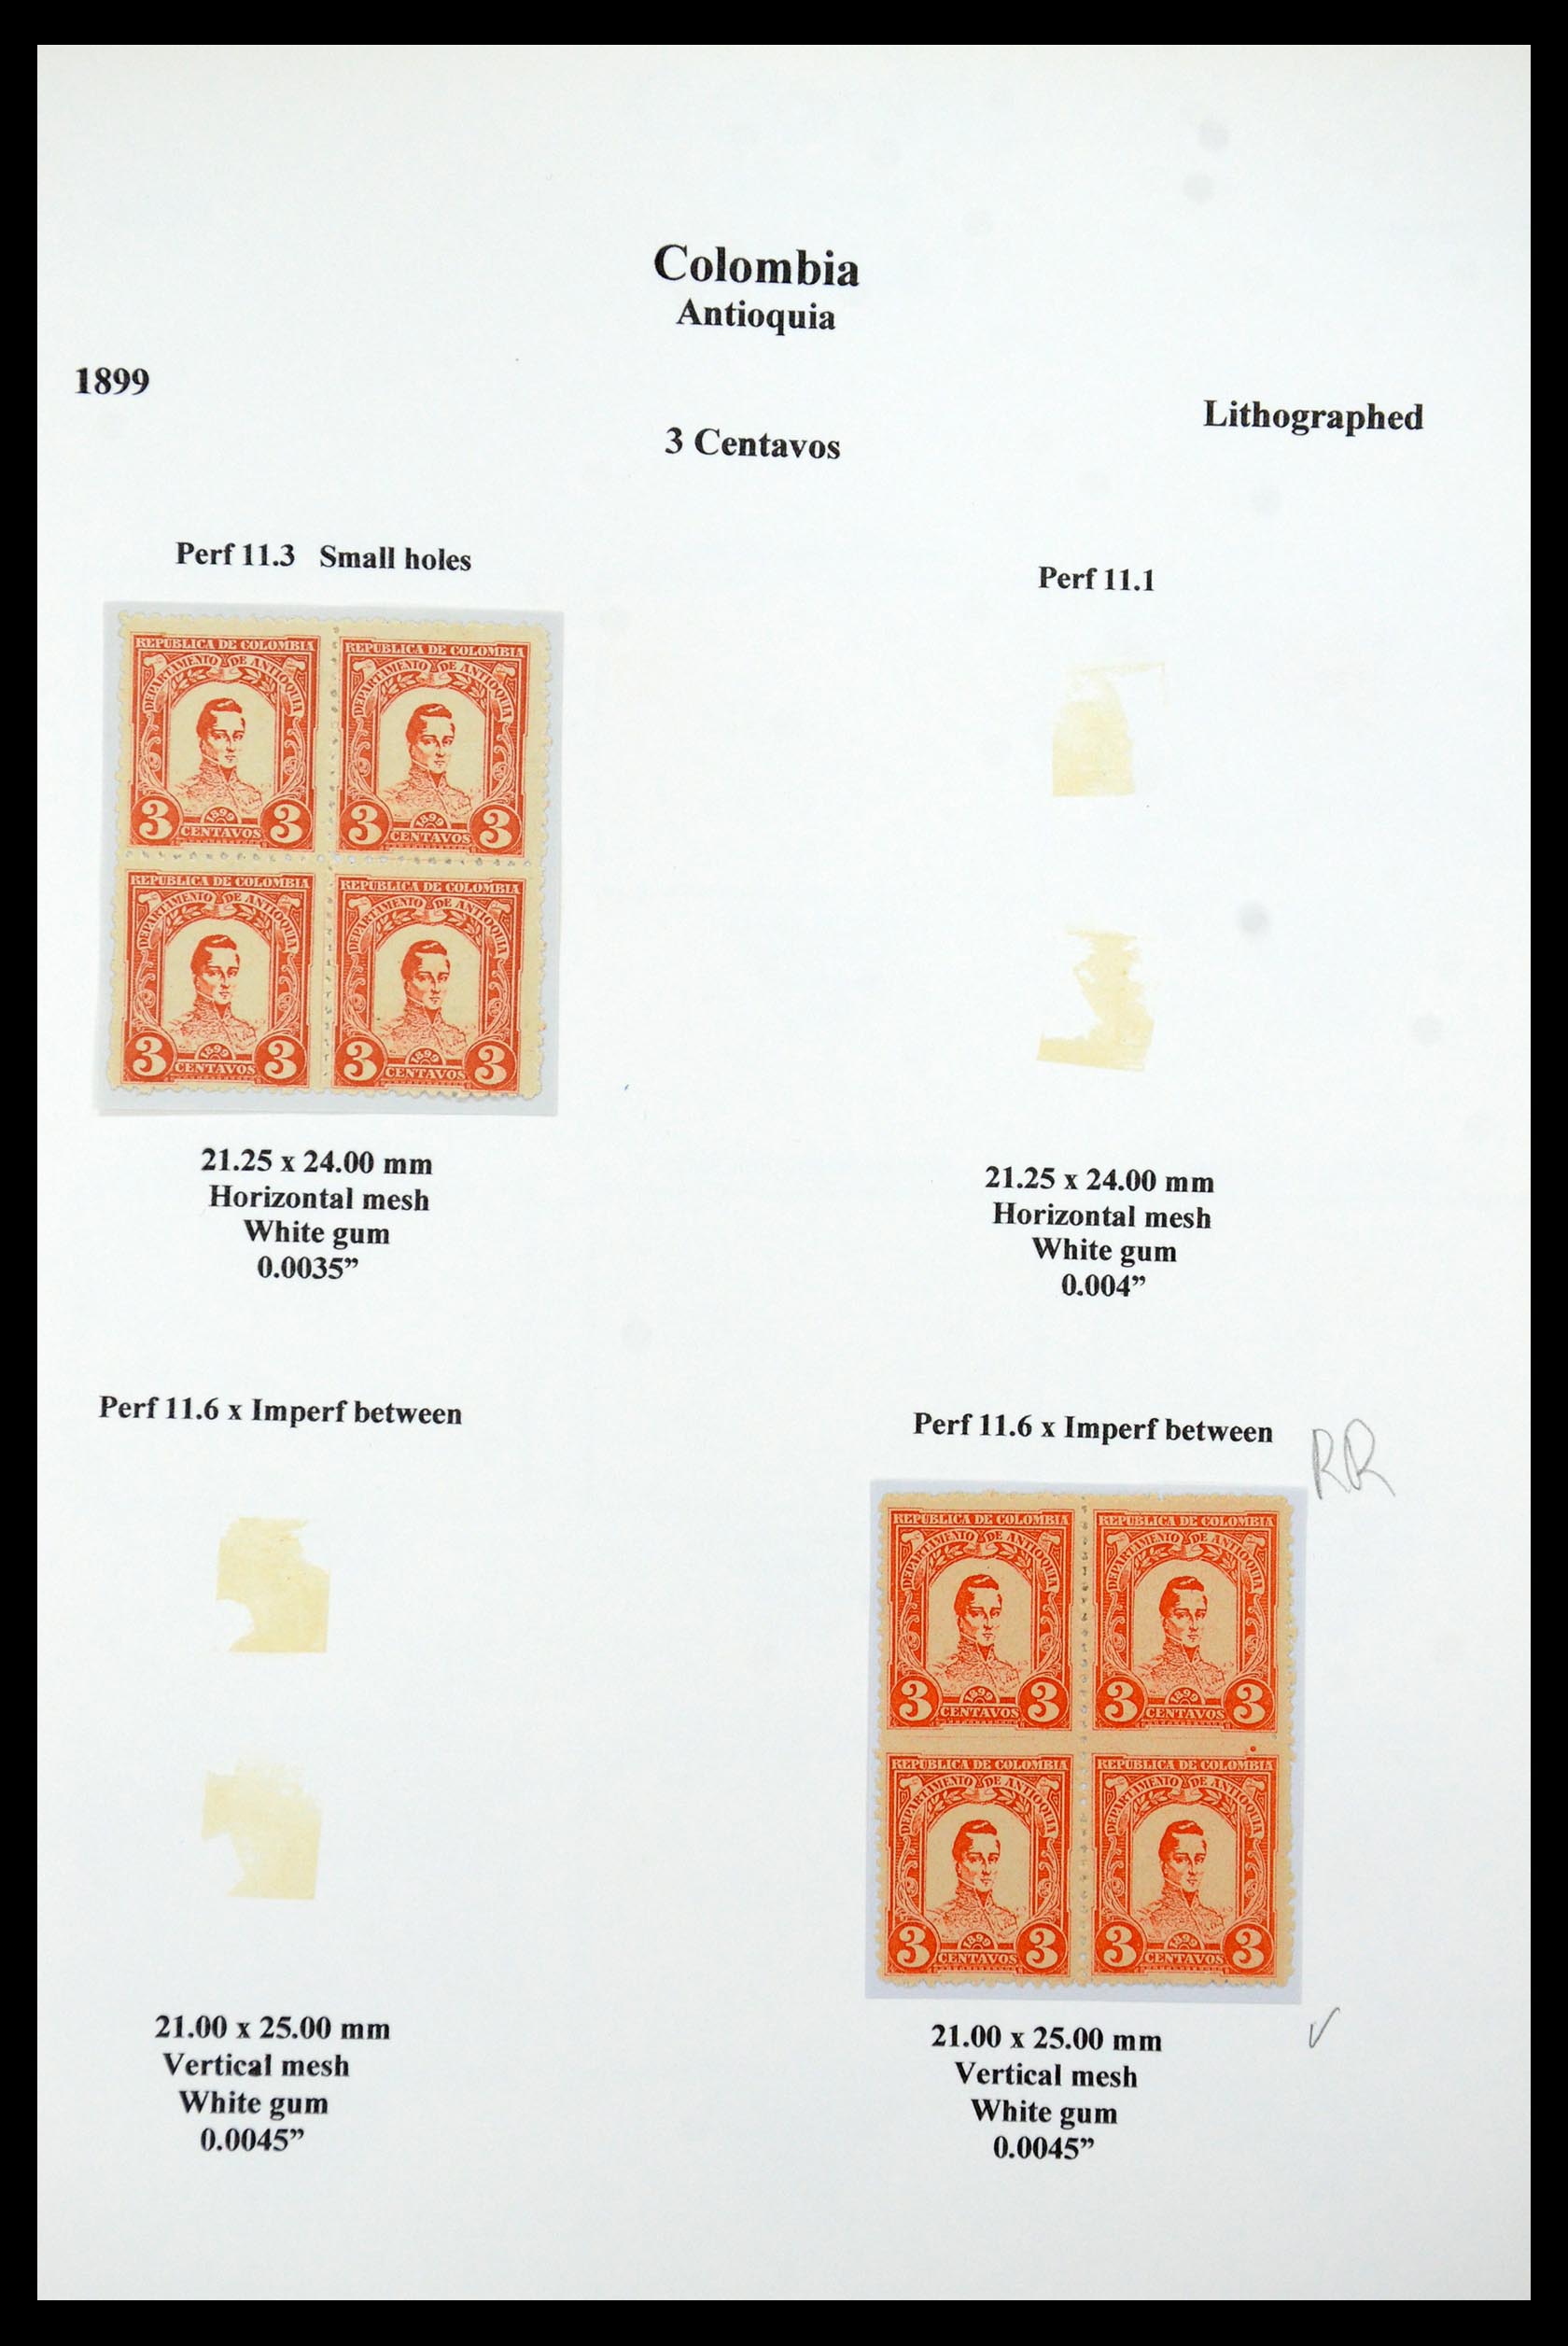 35519 020 - Stamp Collection 35519 Colombia Antioquia 1899.